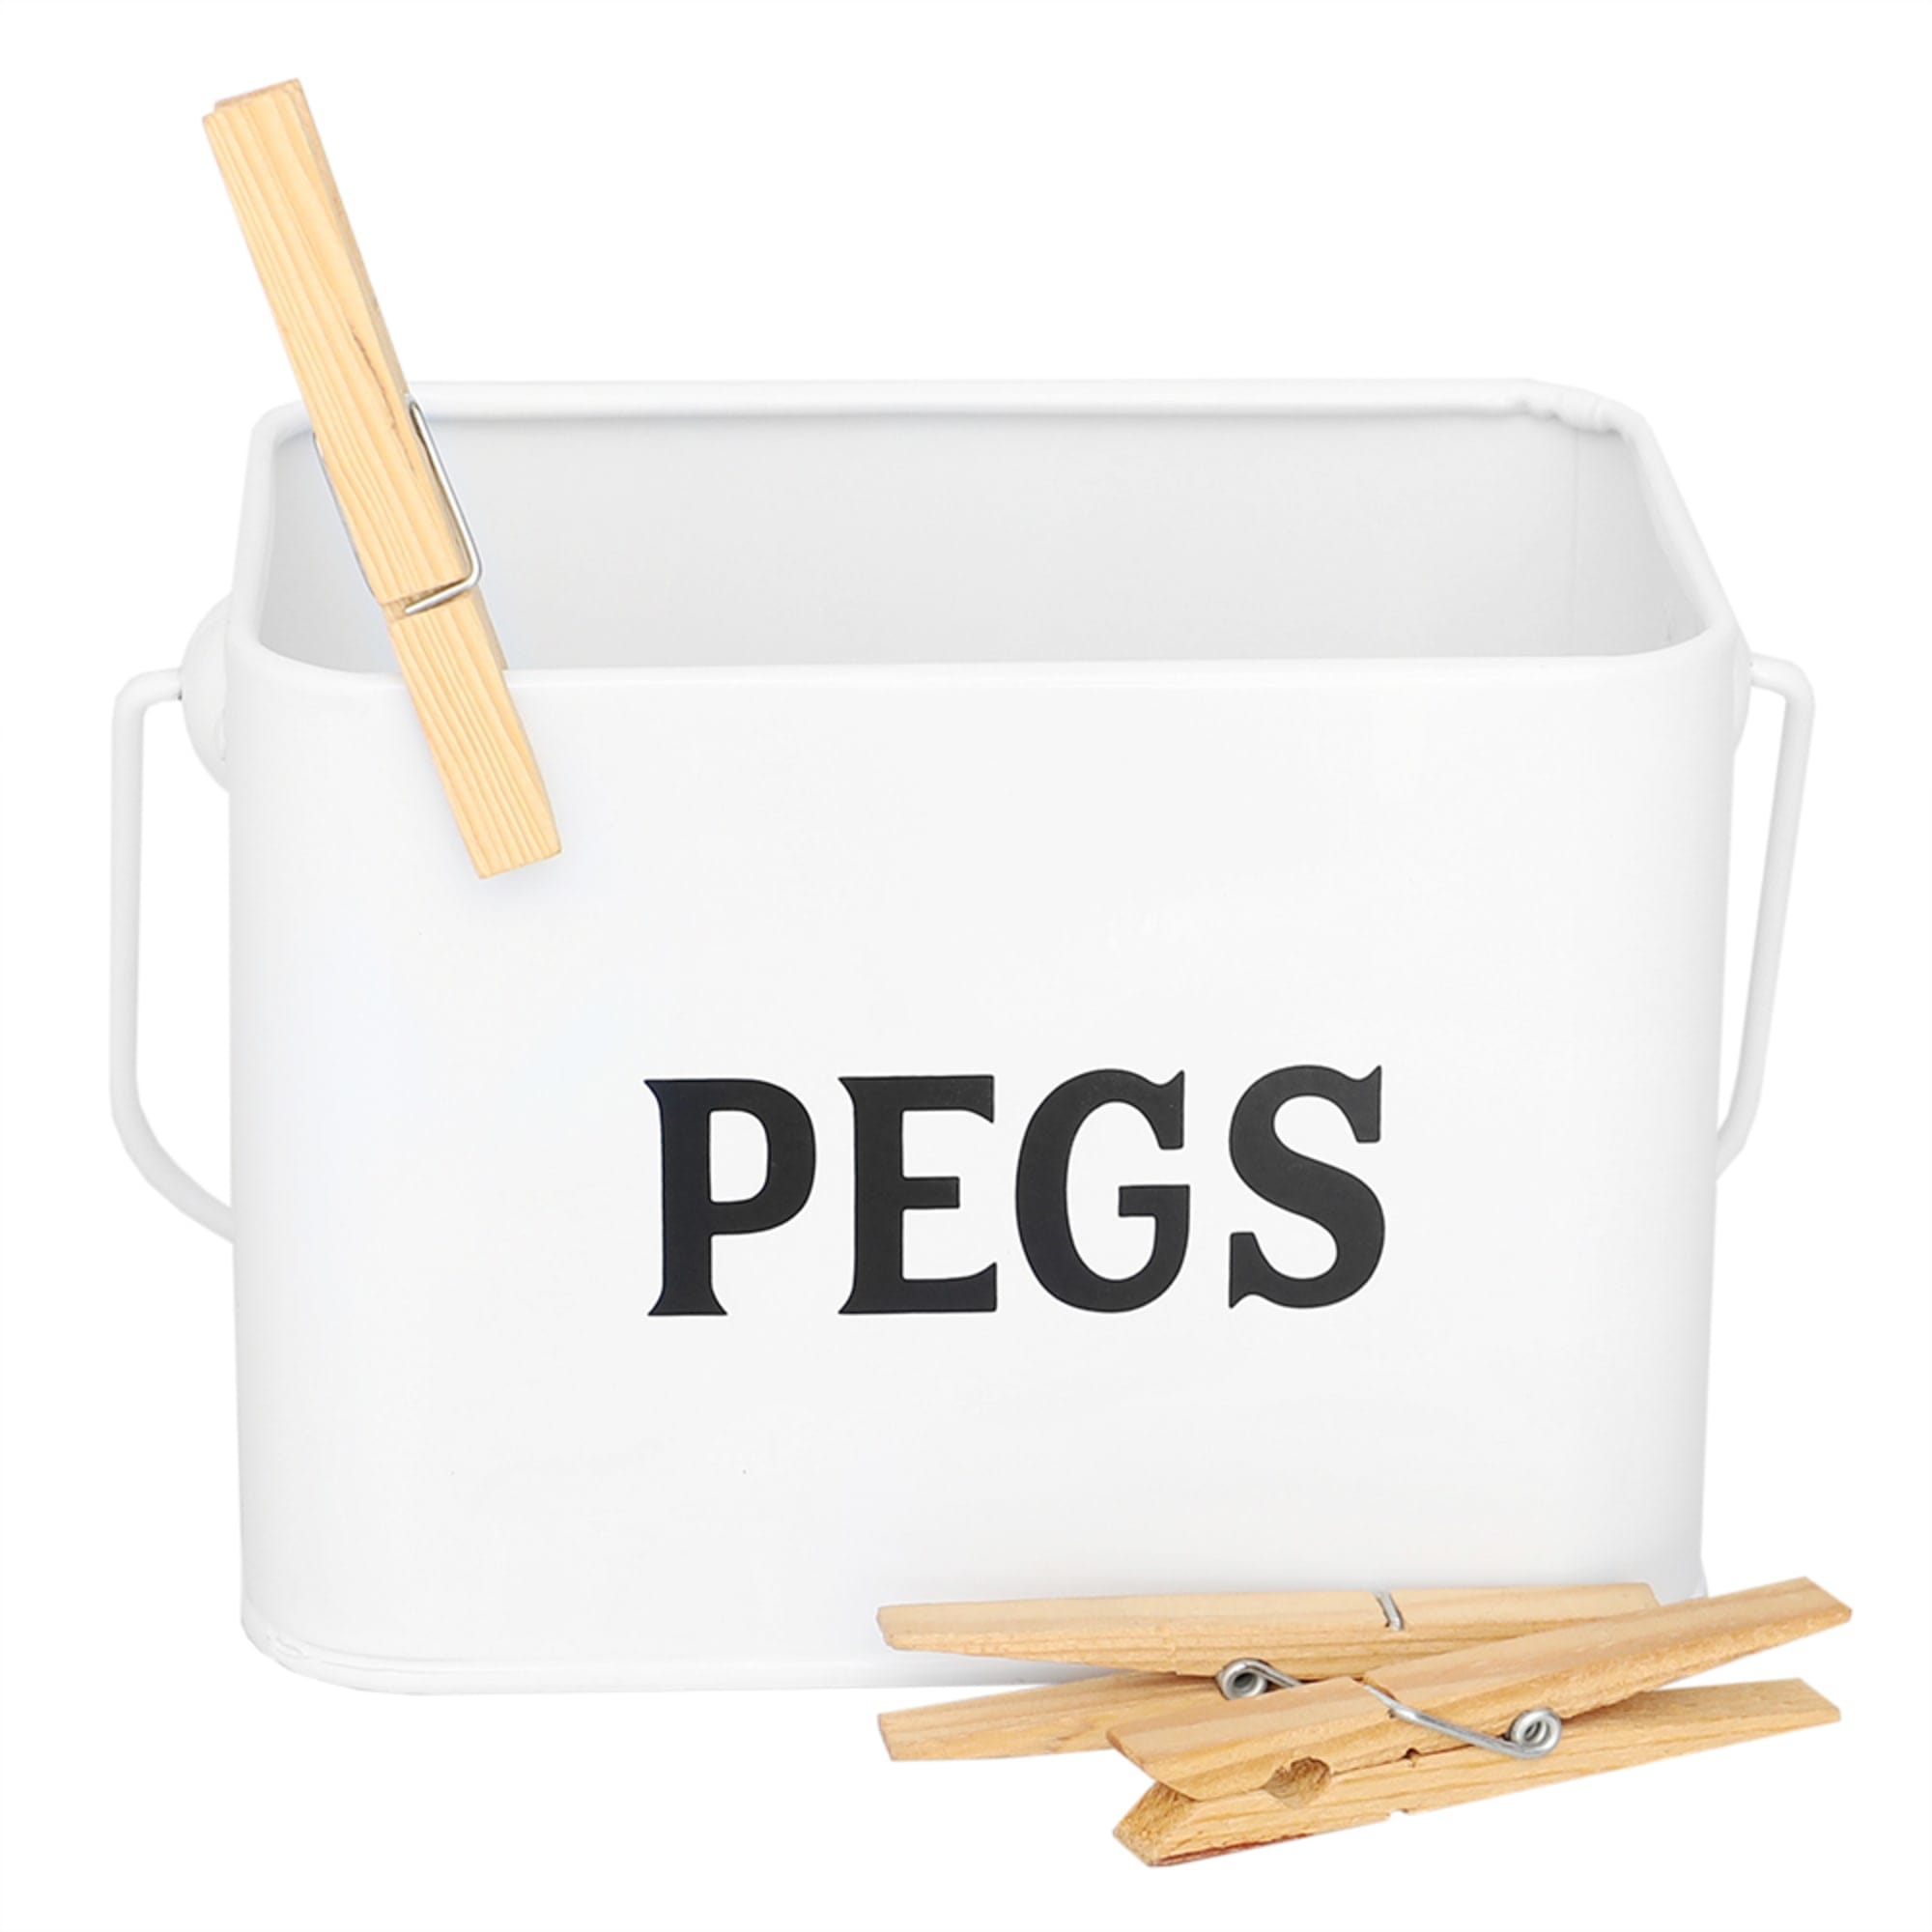 Home Basics Countryside Tin Peg Holder with Handle, White $4.00 EACH, CASE PACK OF 12